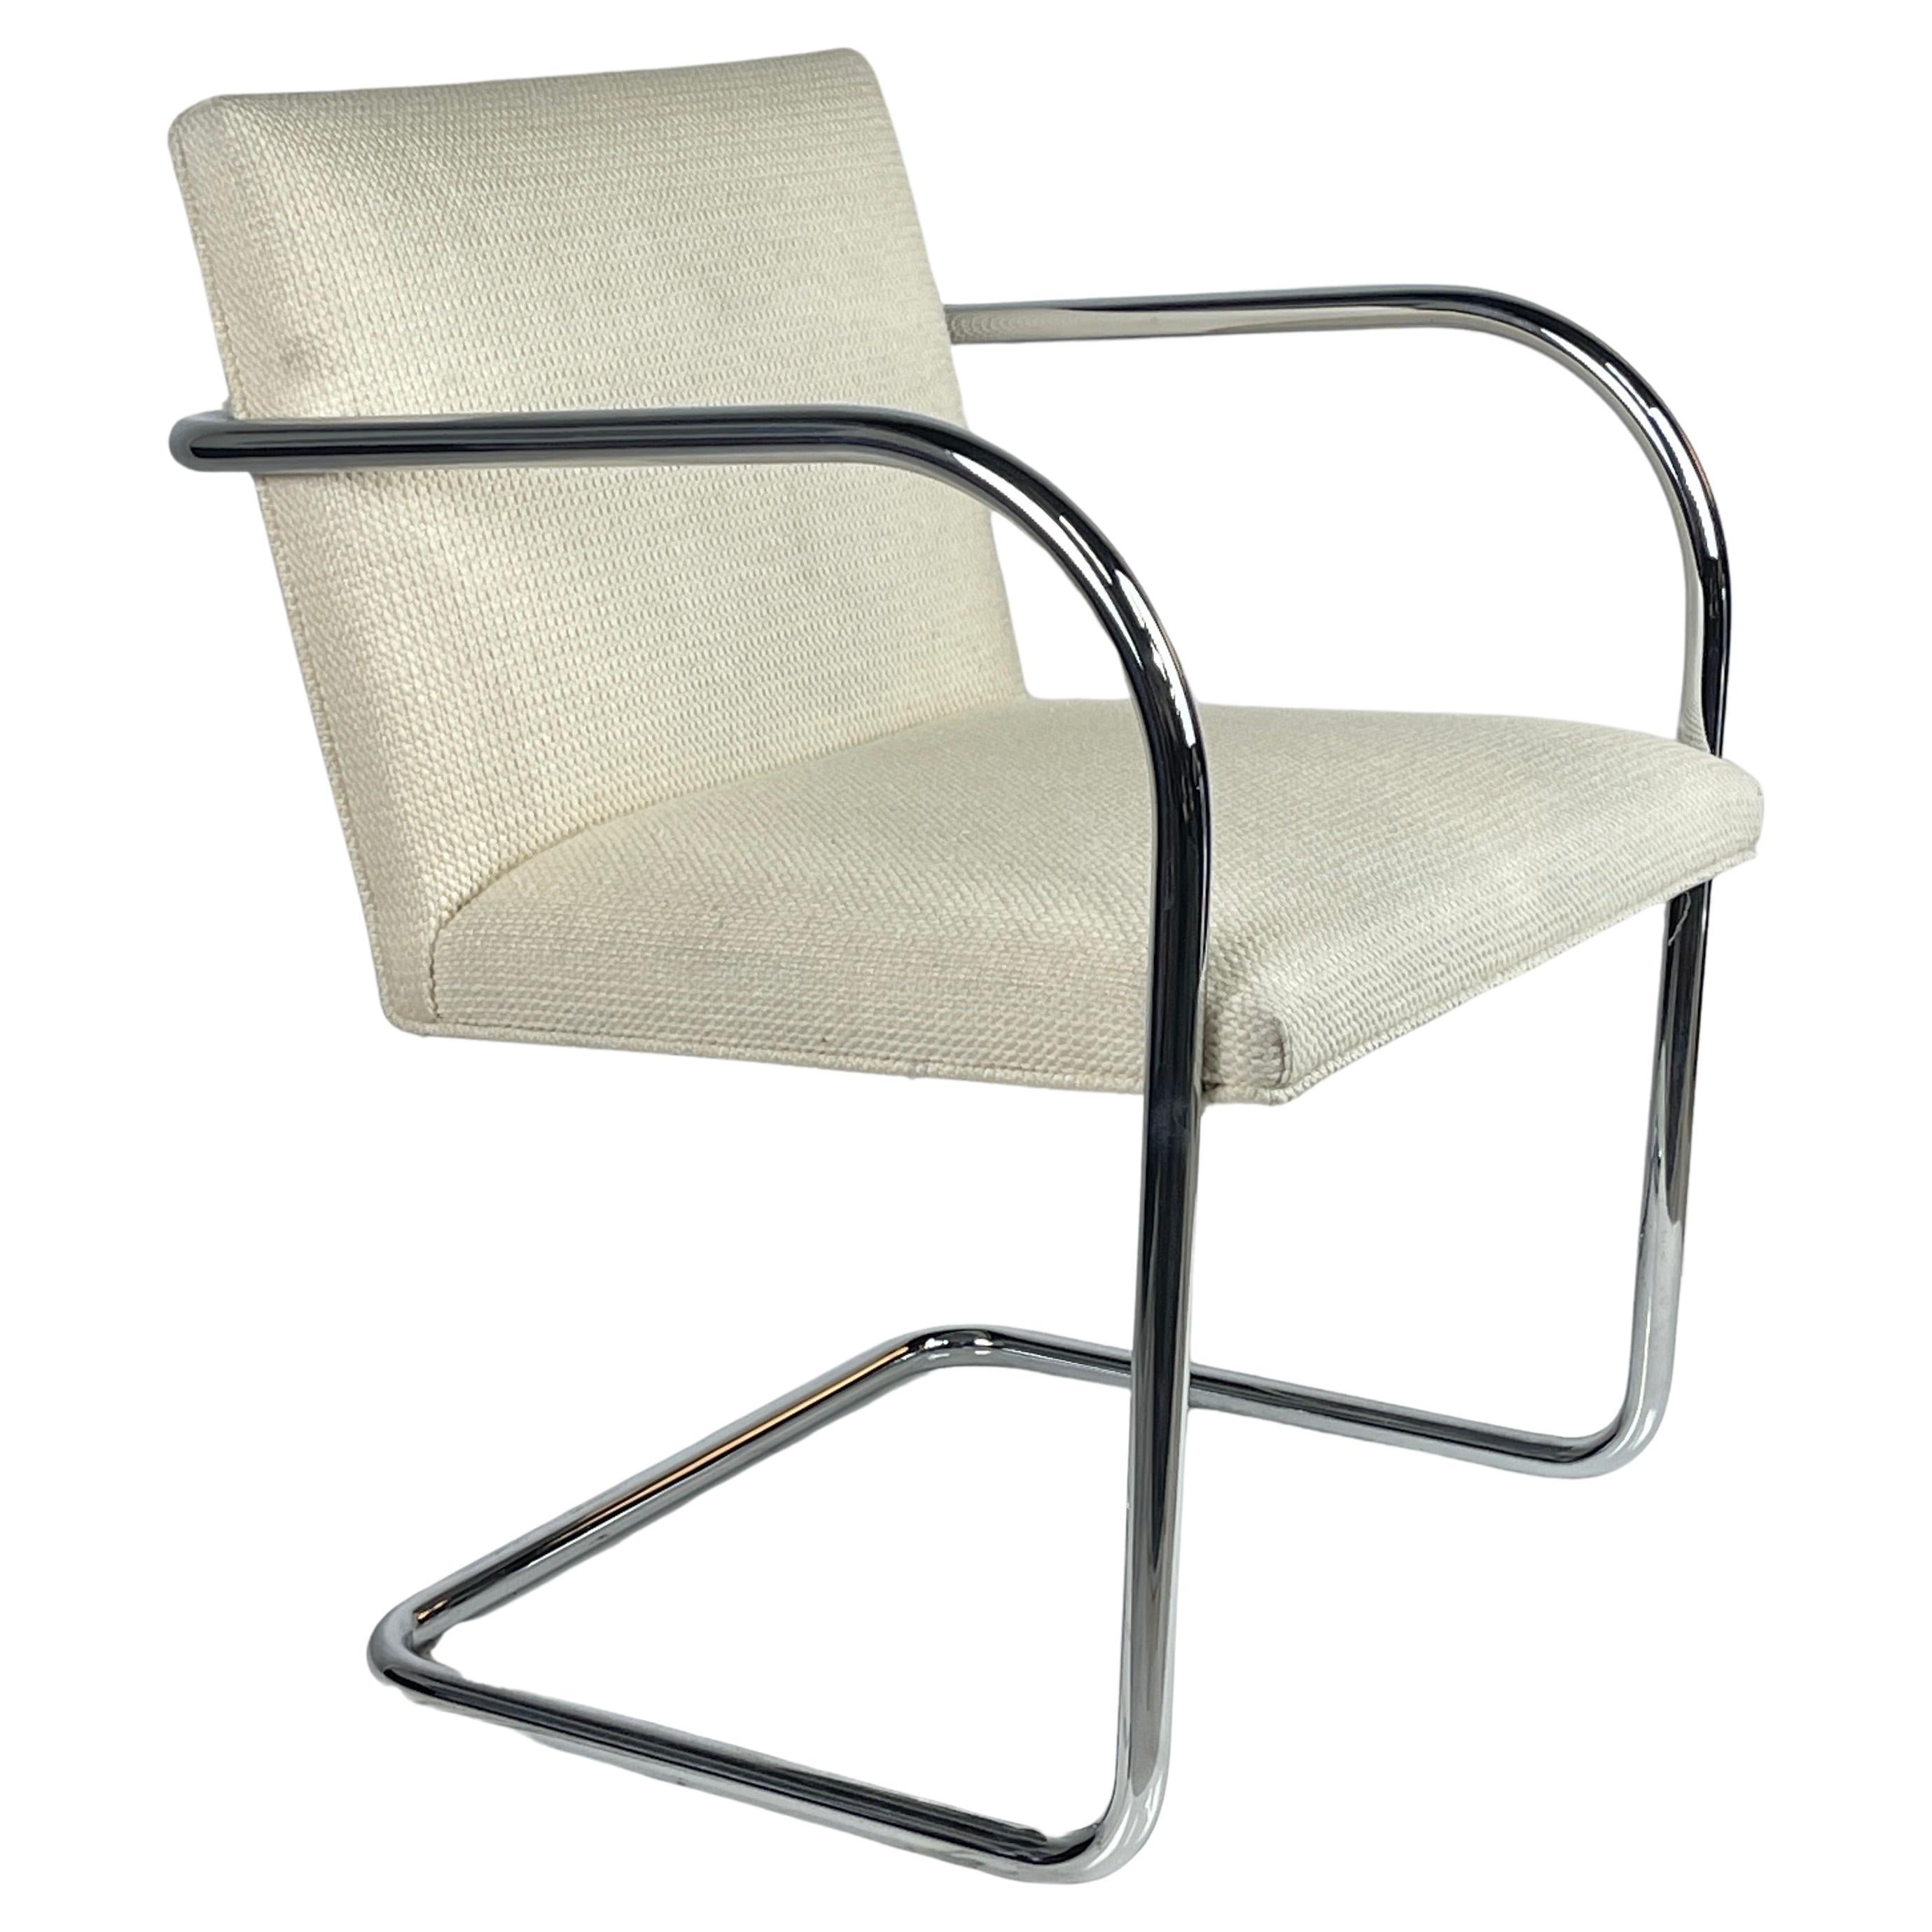 Mies Van Der Rohe for Knoll Brno Chair in Cato Upholstery 60 available For Sale